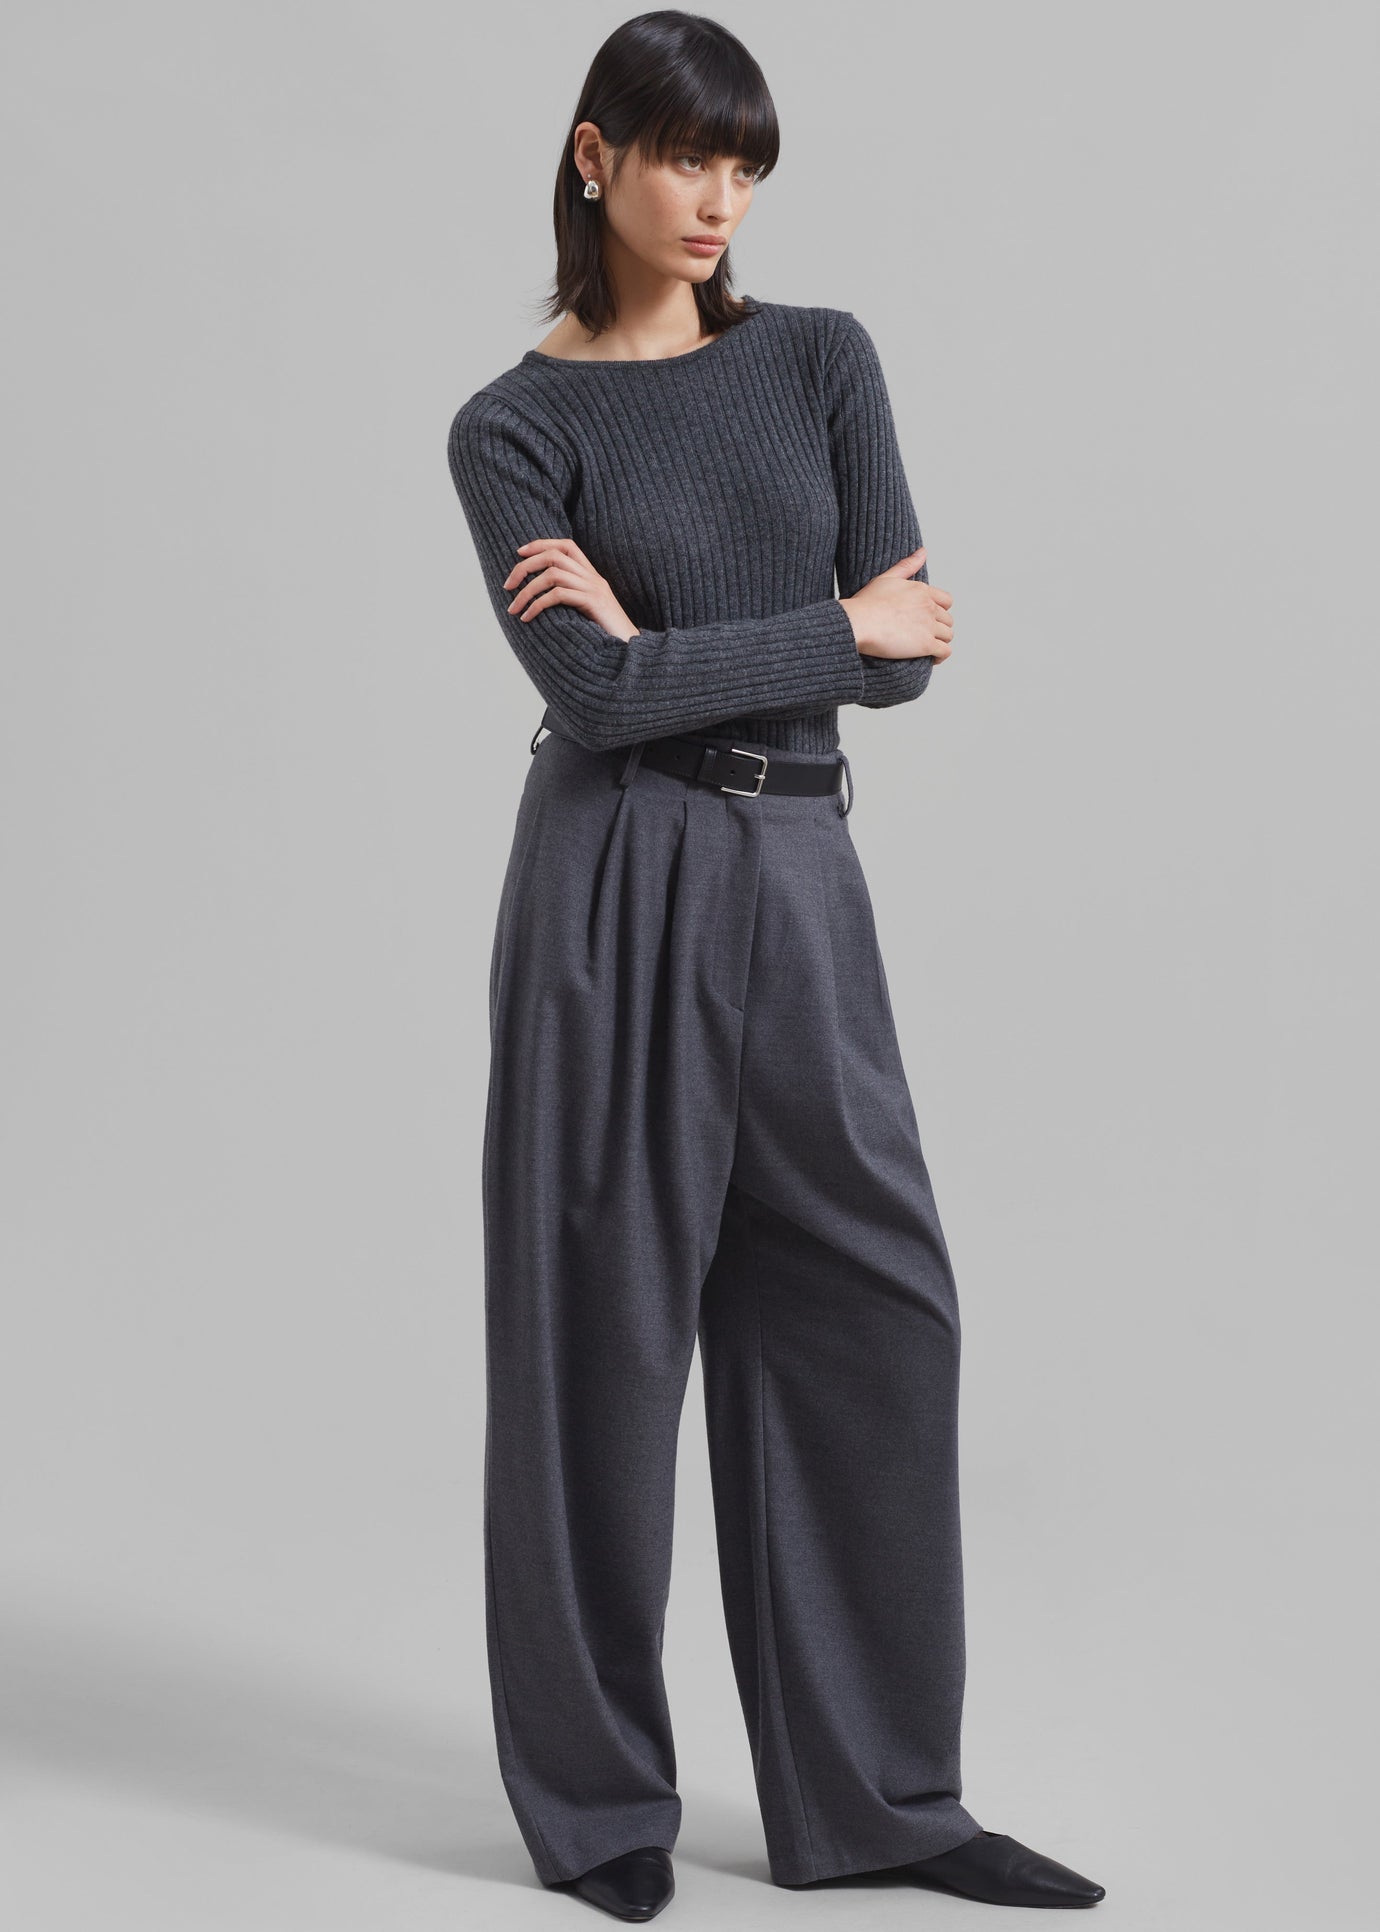 Cora Ribbed Sweater - Charcoal - 1